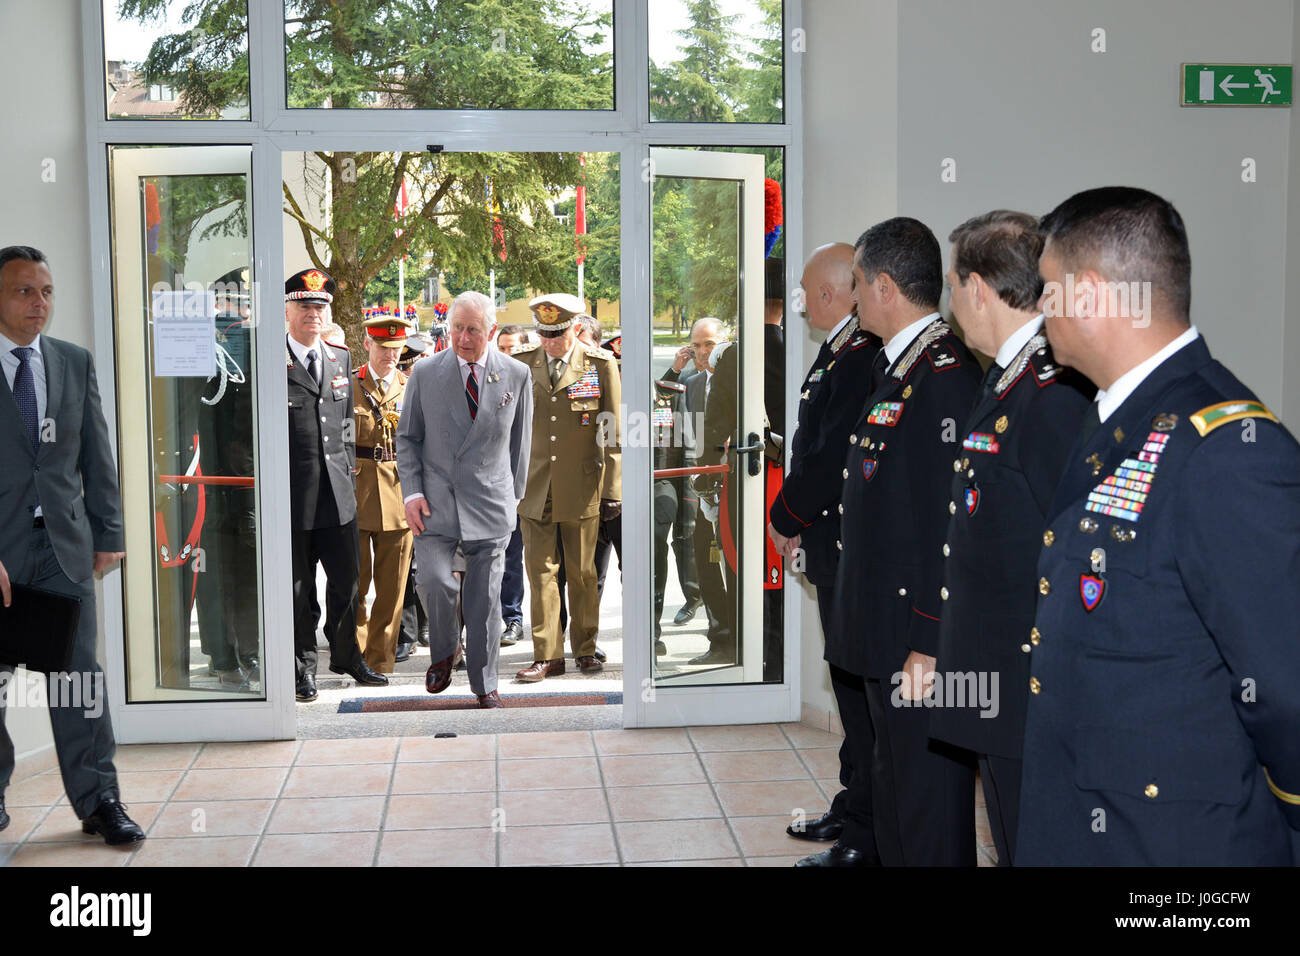 The Royal Highness, Prince Charles, Prince of Wales during visit at Center of Excellence for Stability Police Units (CoESPU) Vicenza, Italy, April 1, 2017. (U.S. Army Photo by Visual Information Specialist Antonio Bedin/released) Stock Photo